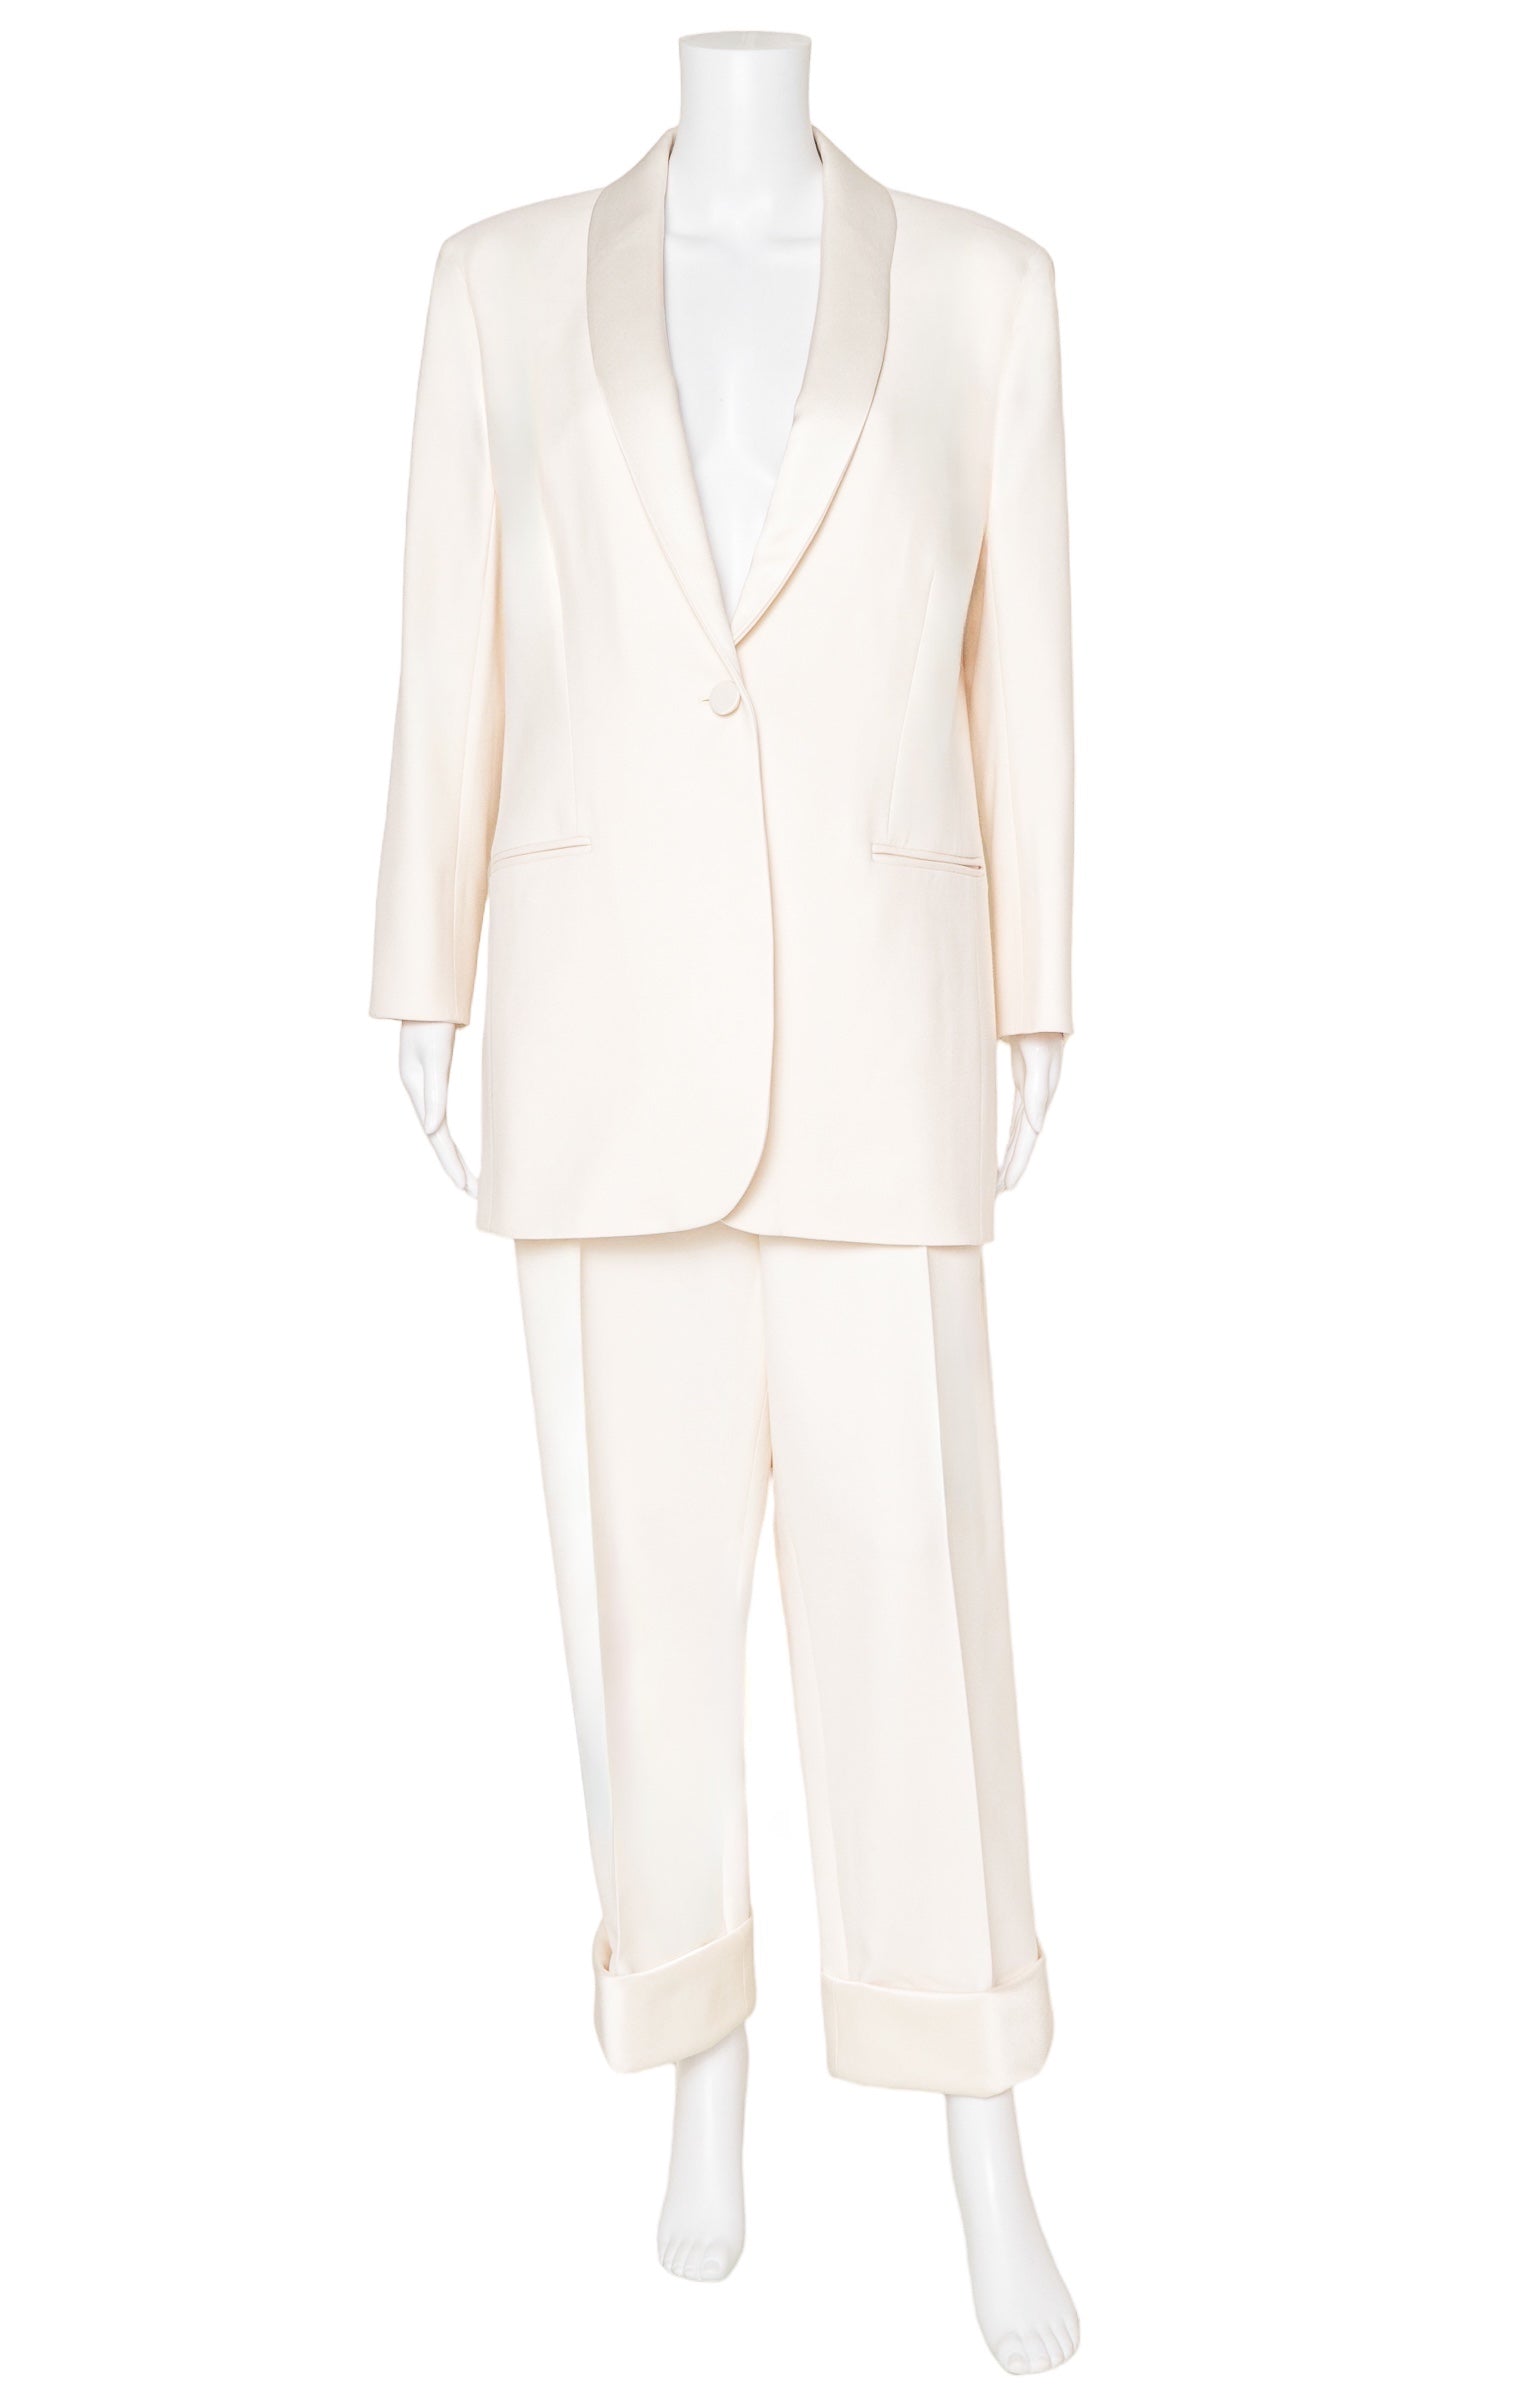 THE ROW (RARE) 3-Piece Suit Size: Jacket - US 14 Pants - No size tags, fit like US 10 Scarf - 64" x 37"